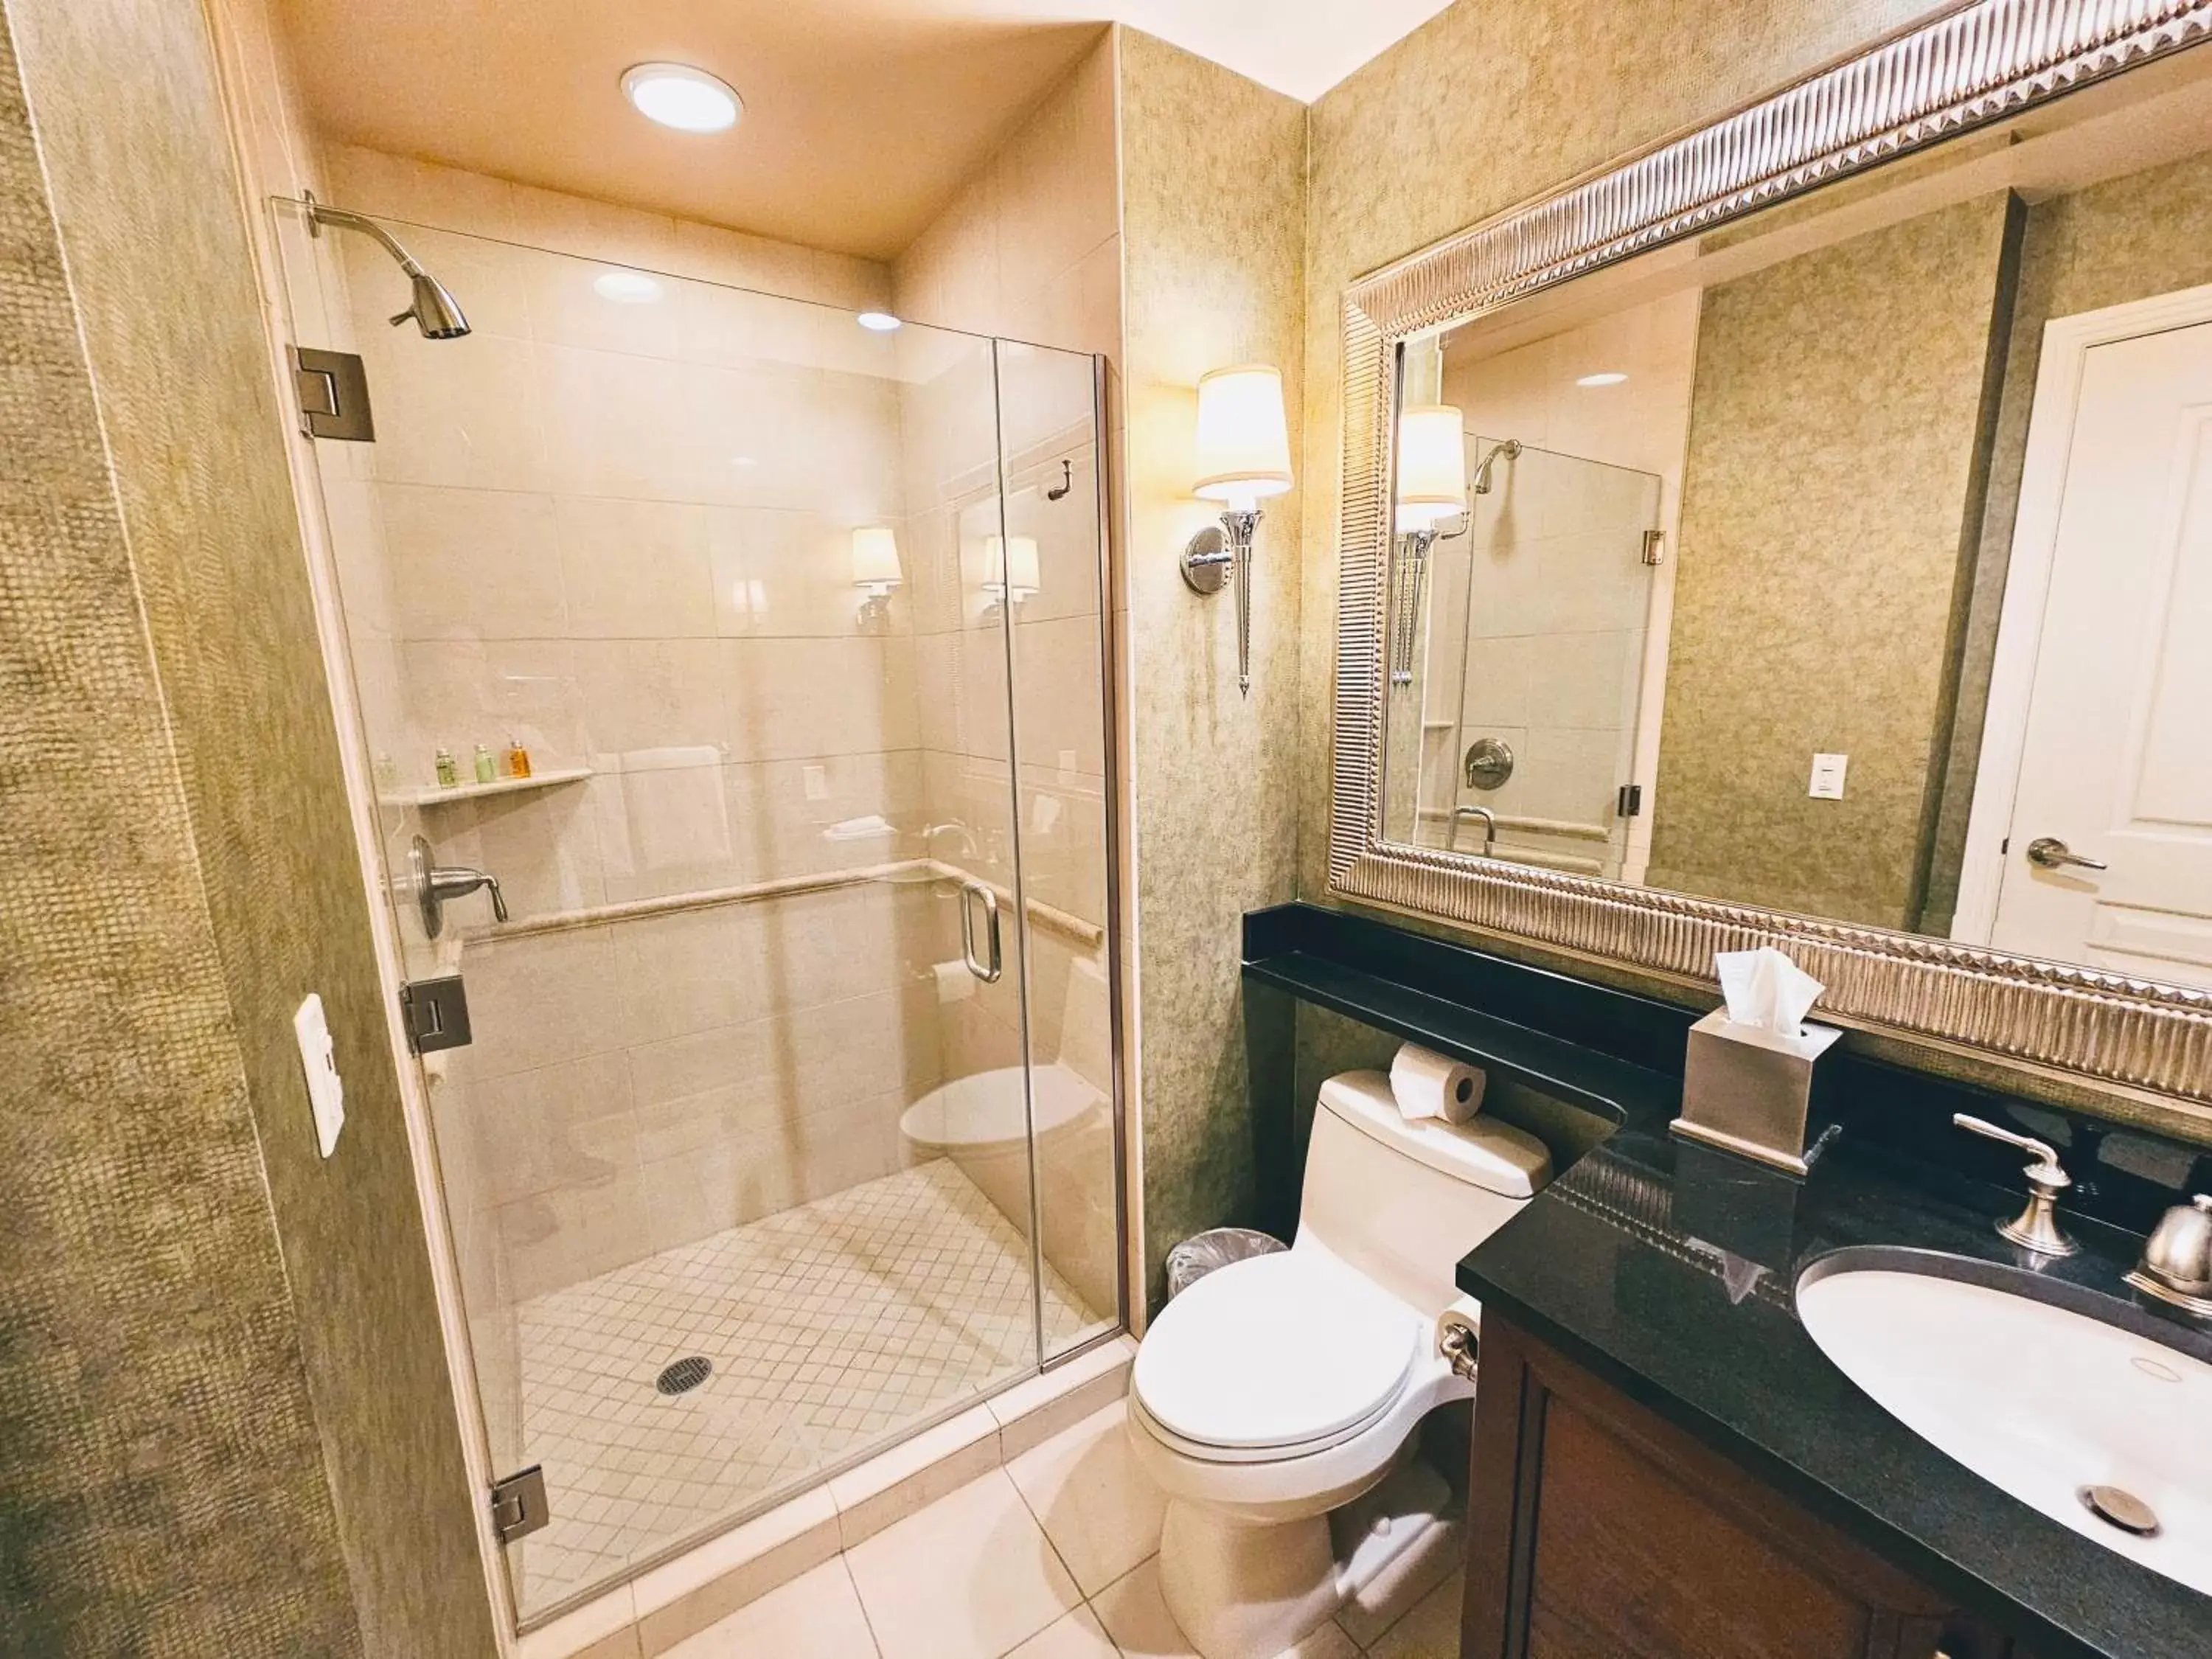 Bathroom in MGM Signature Strip view balcony full kitchen - 1 Br suite 2 full bath - F1 track view